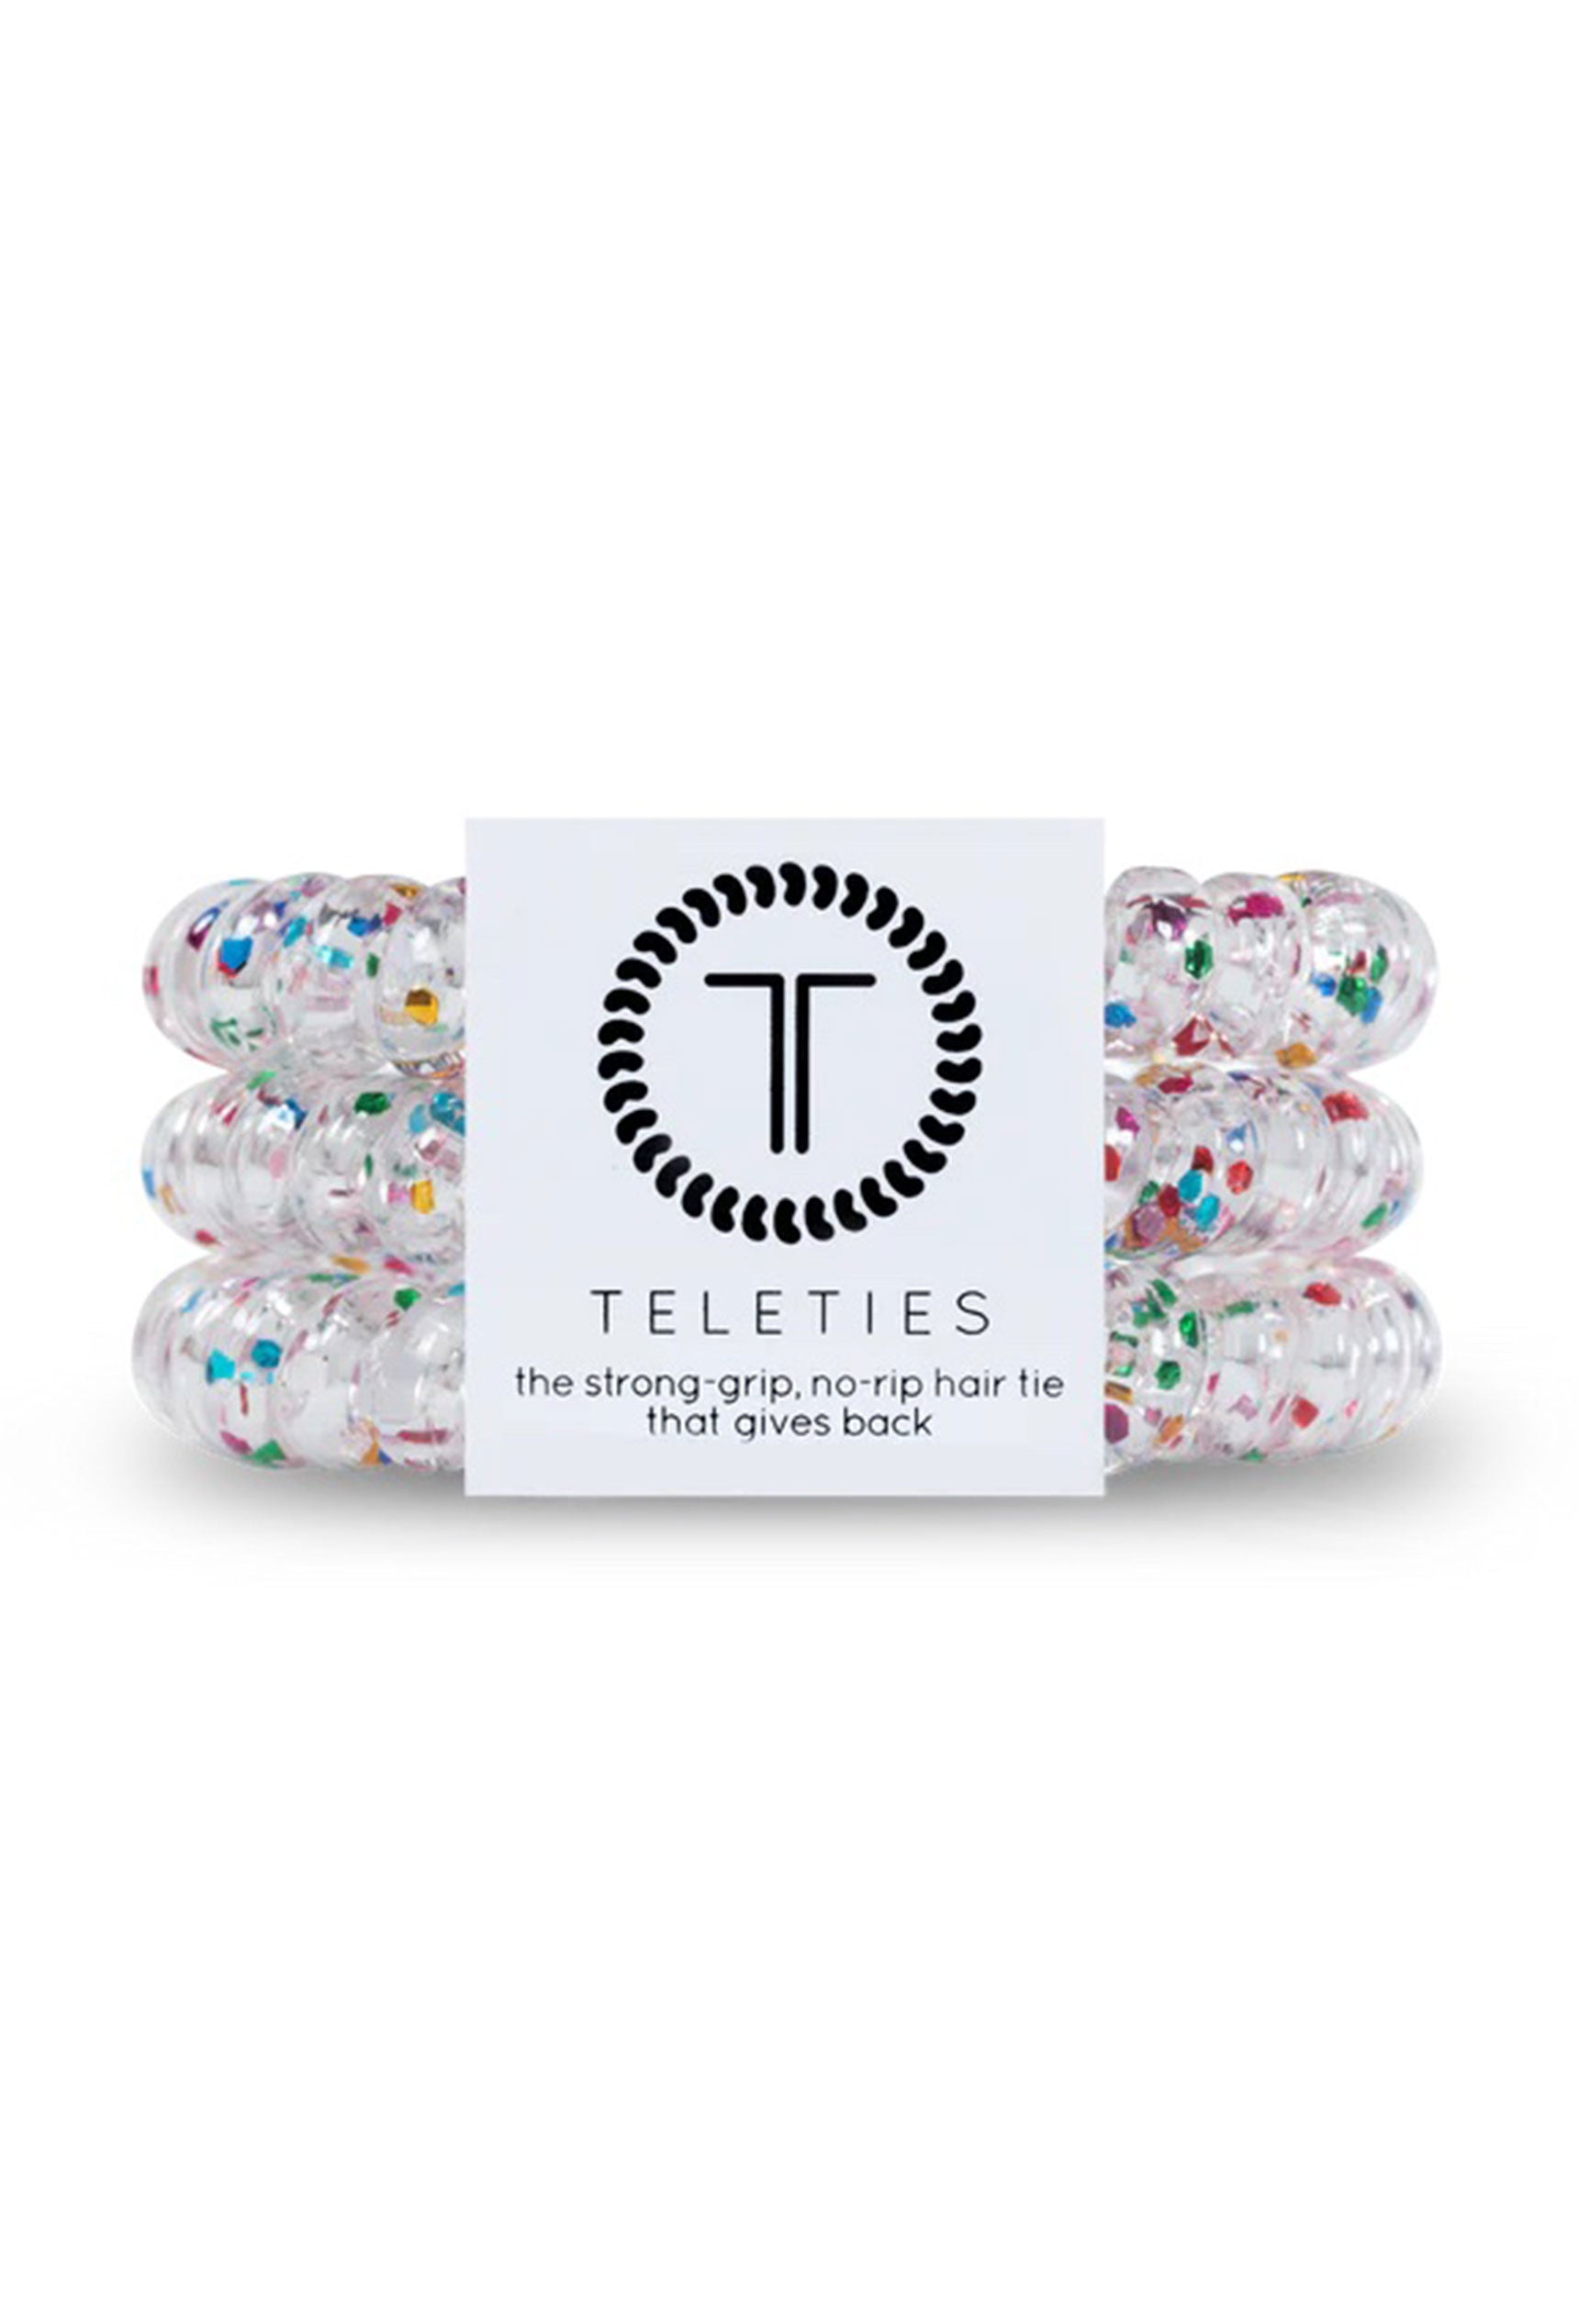 TELETIES Small Hair Ties - Party People, set of 3, coil style hair ties, clear with confetti